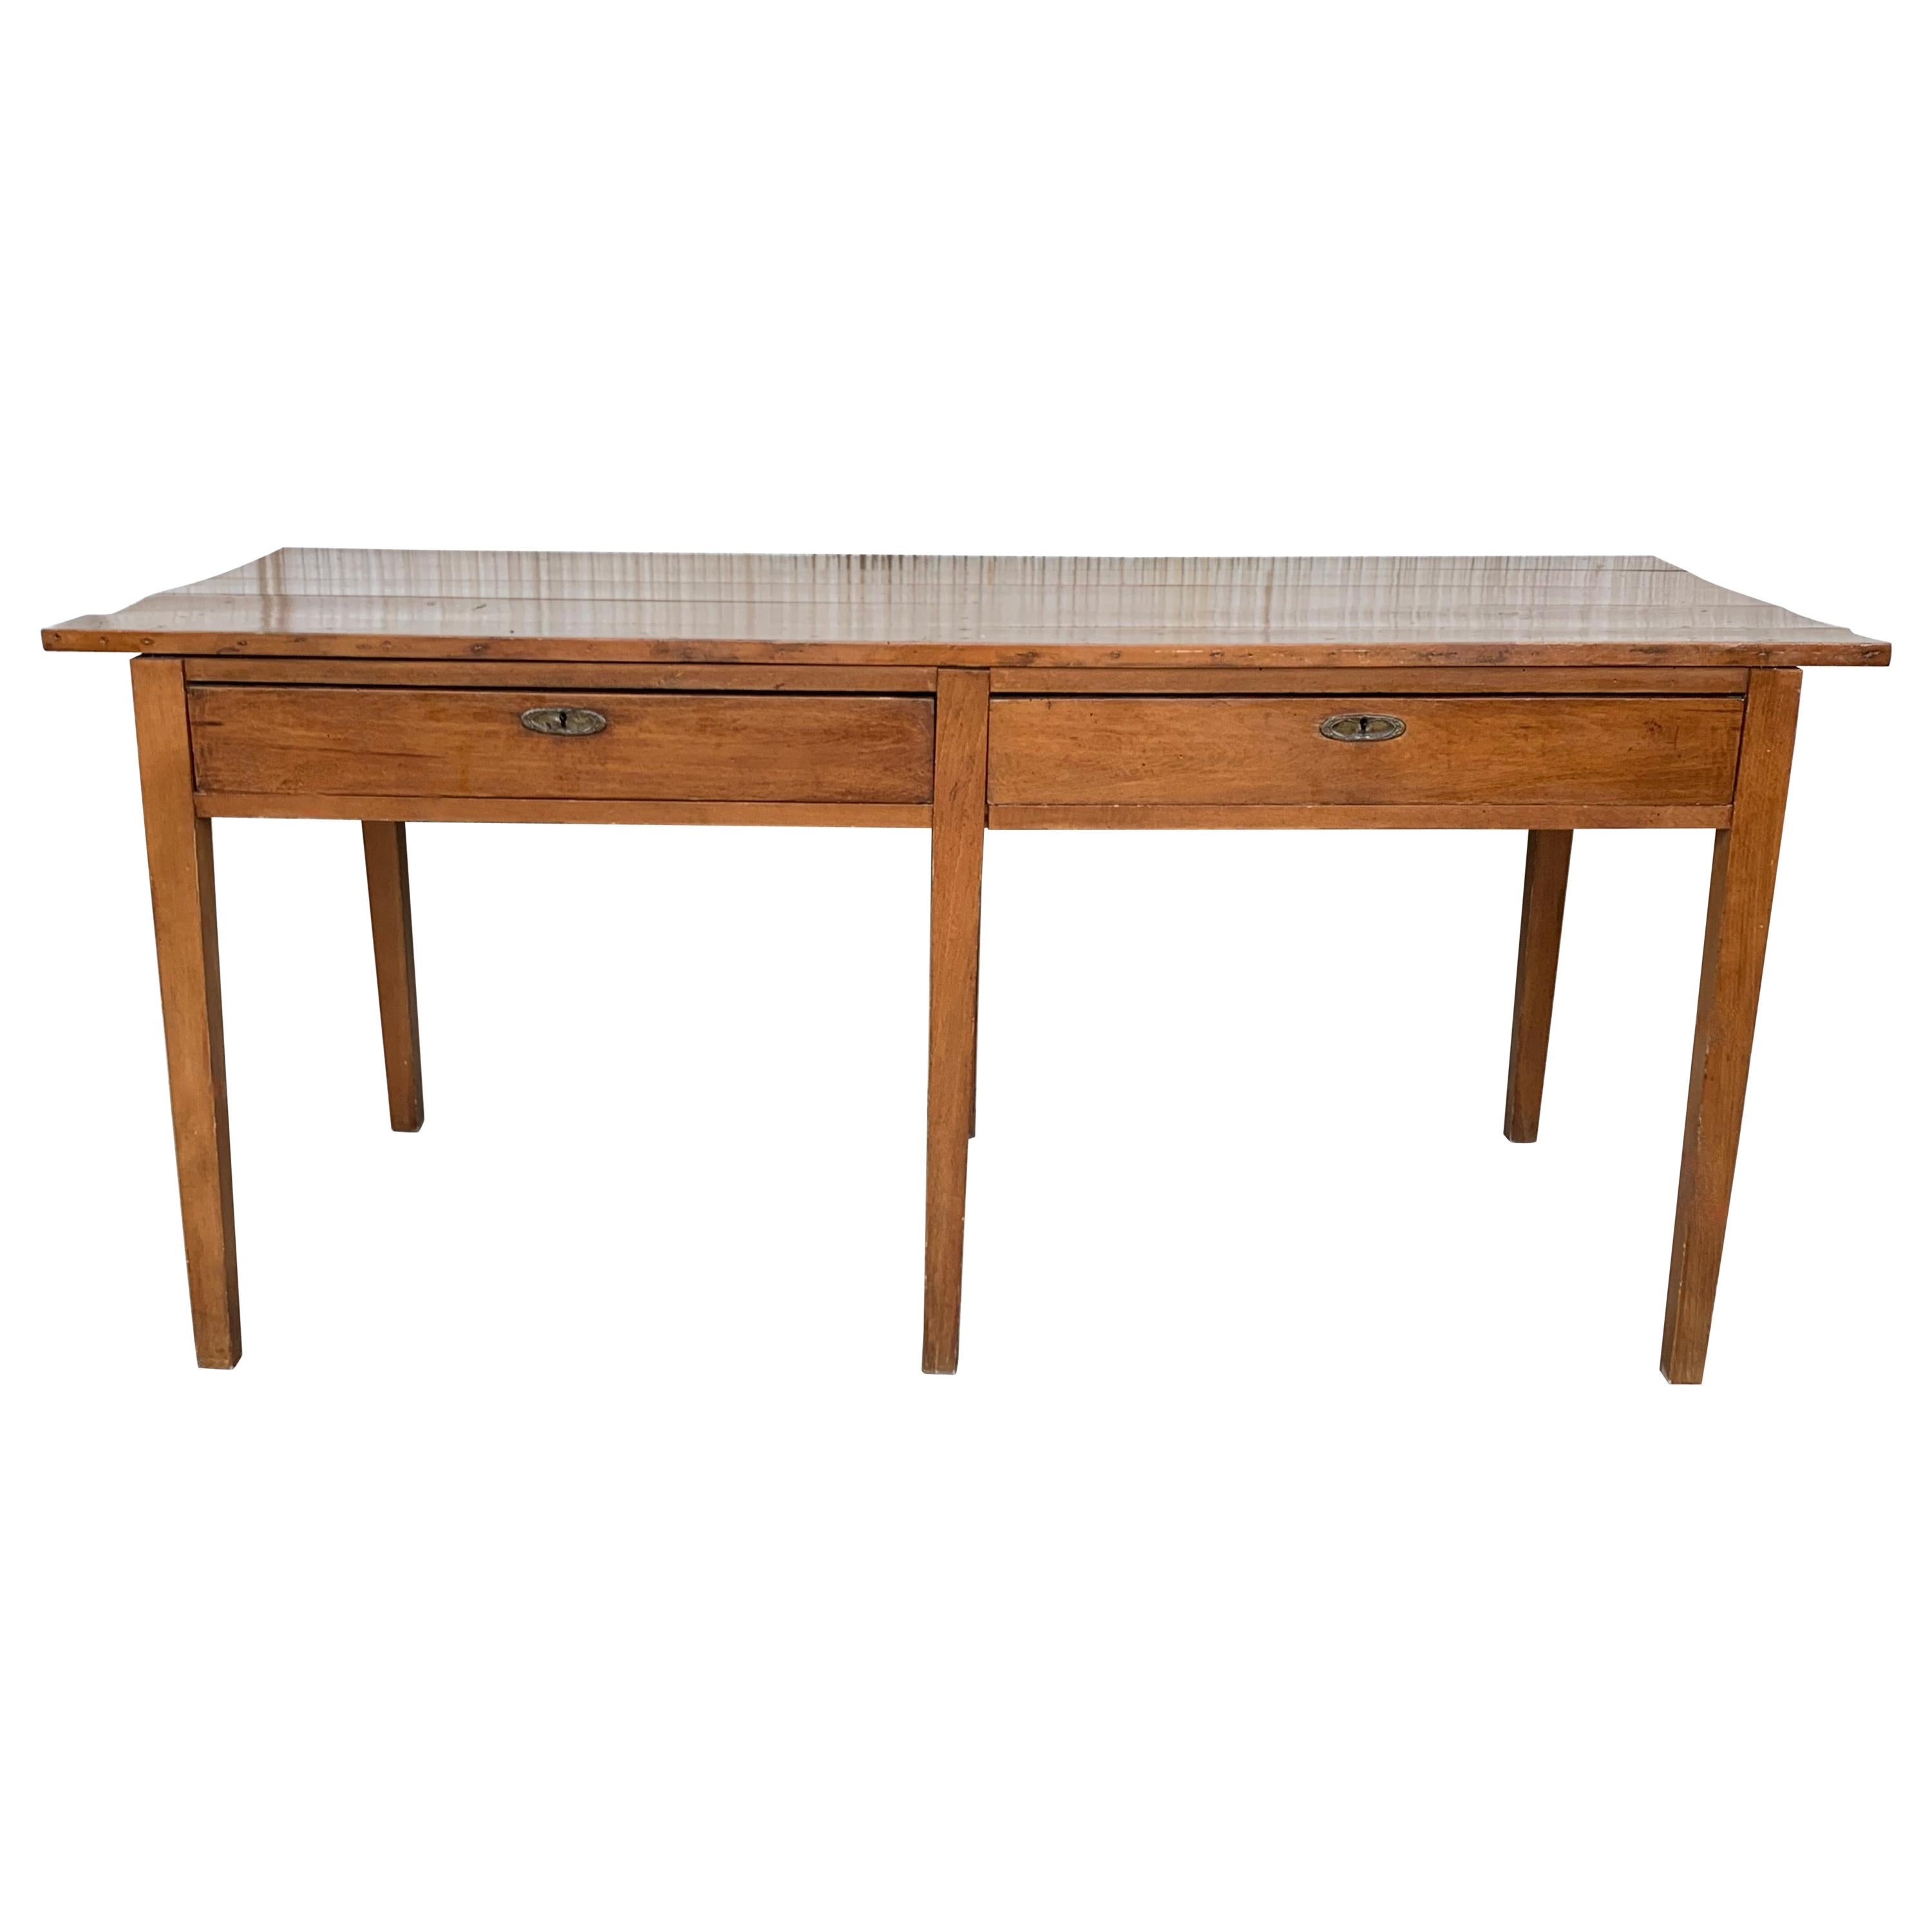 Early 20th Spanish Mobila Country Farm Desk Table or Butcher Block